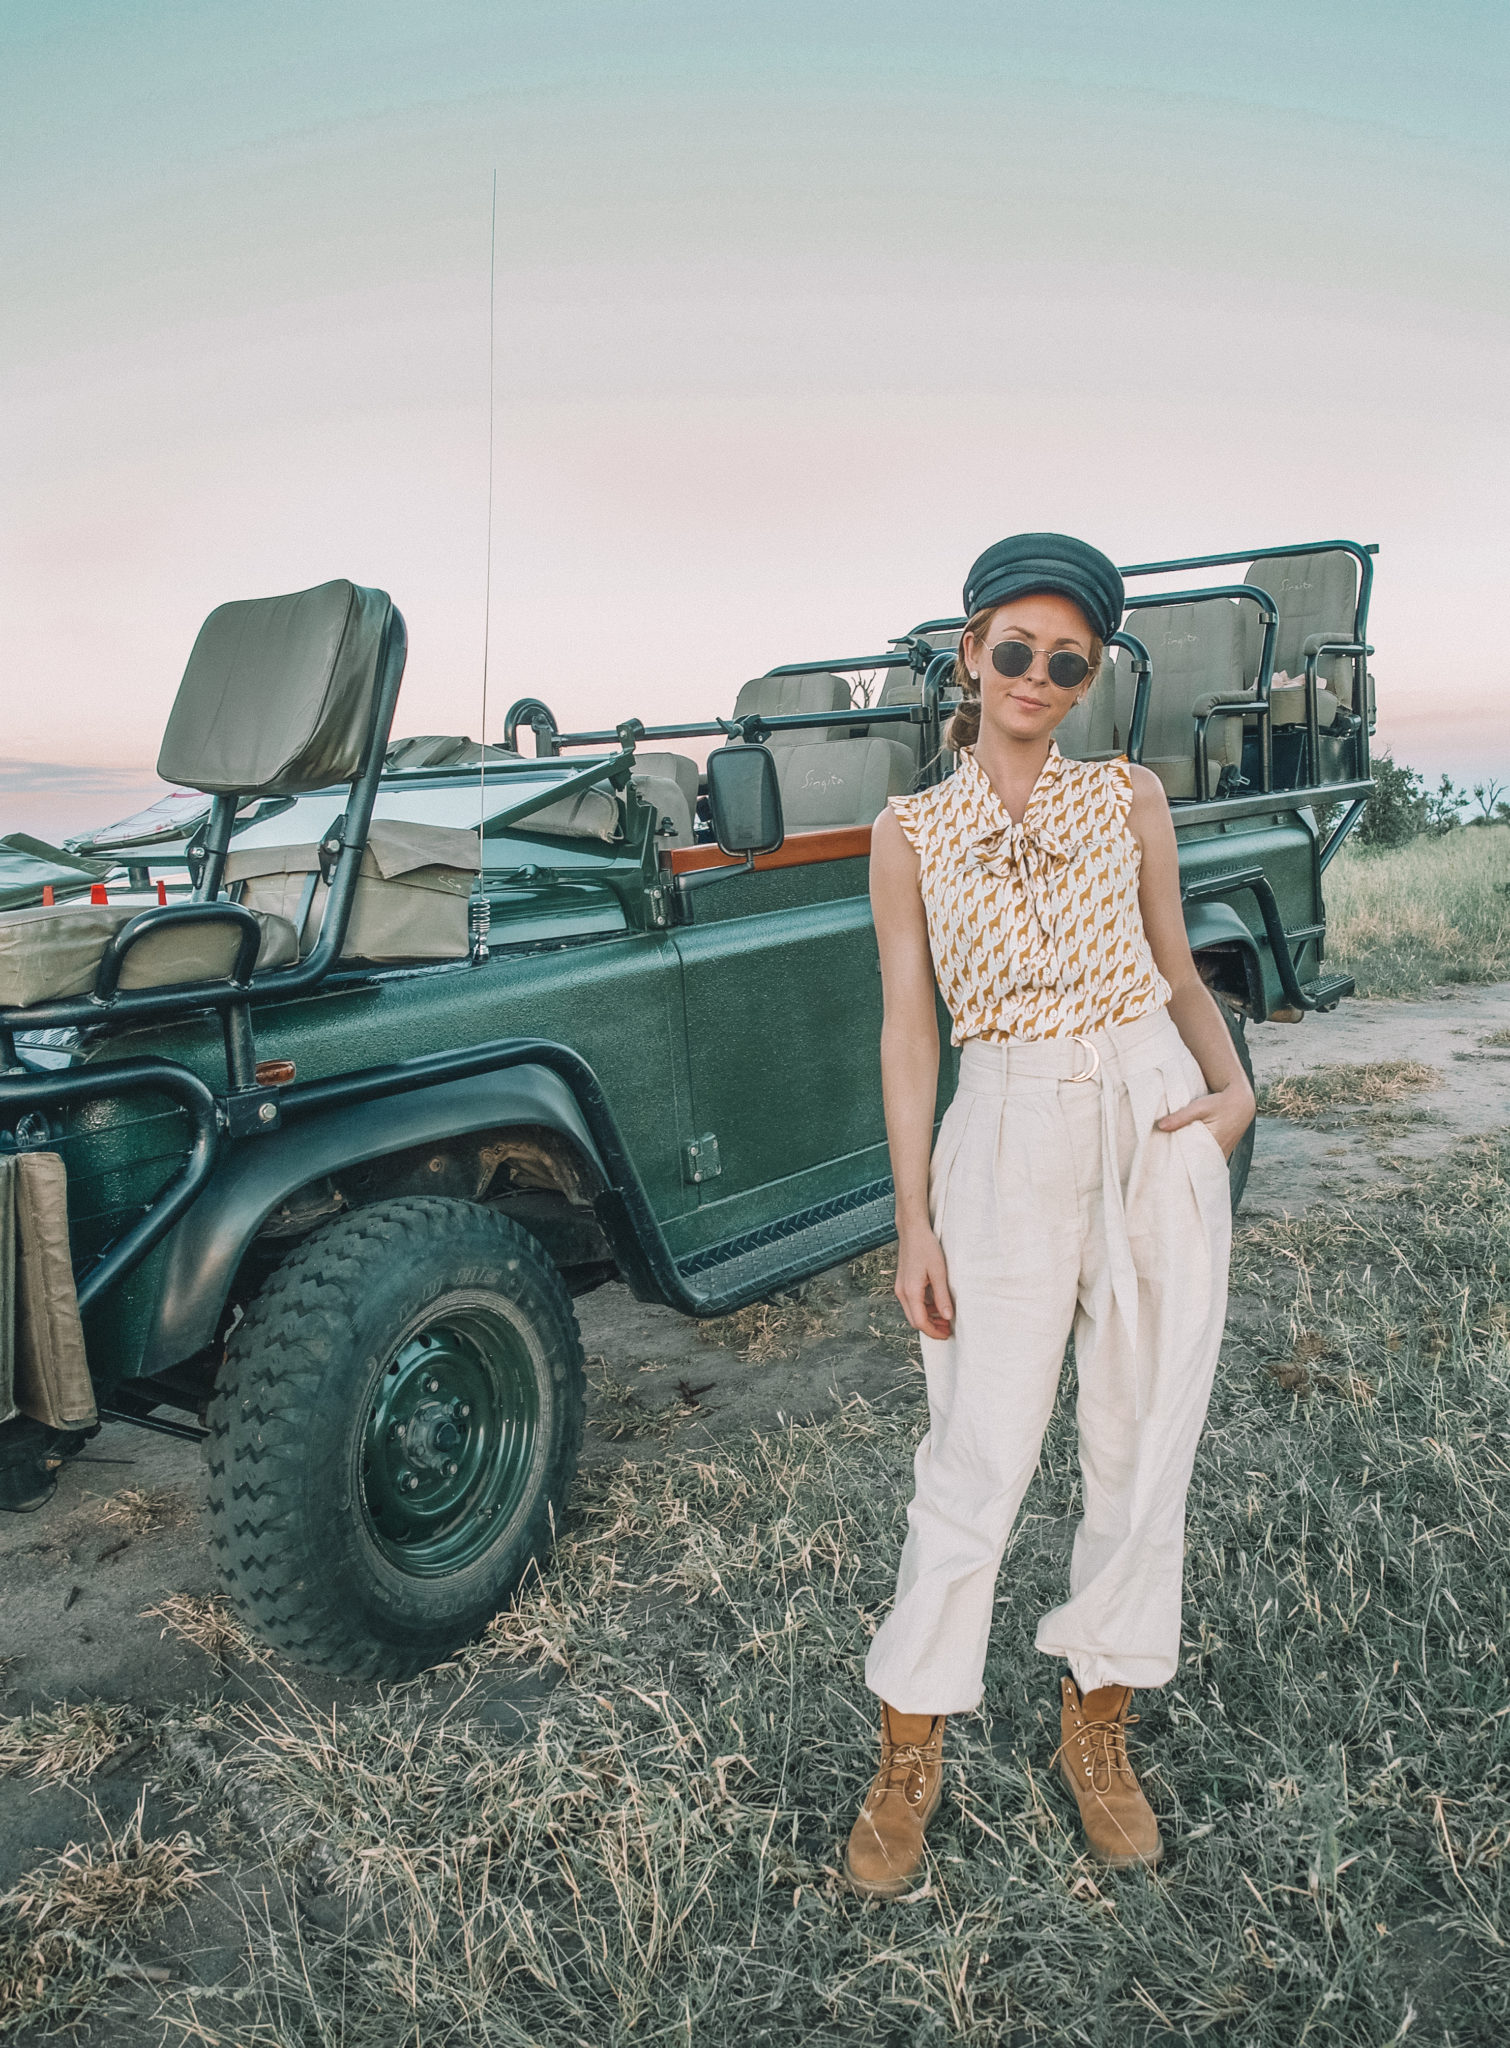 What to Pack for Safari: A complete Safari Packing Guide!